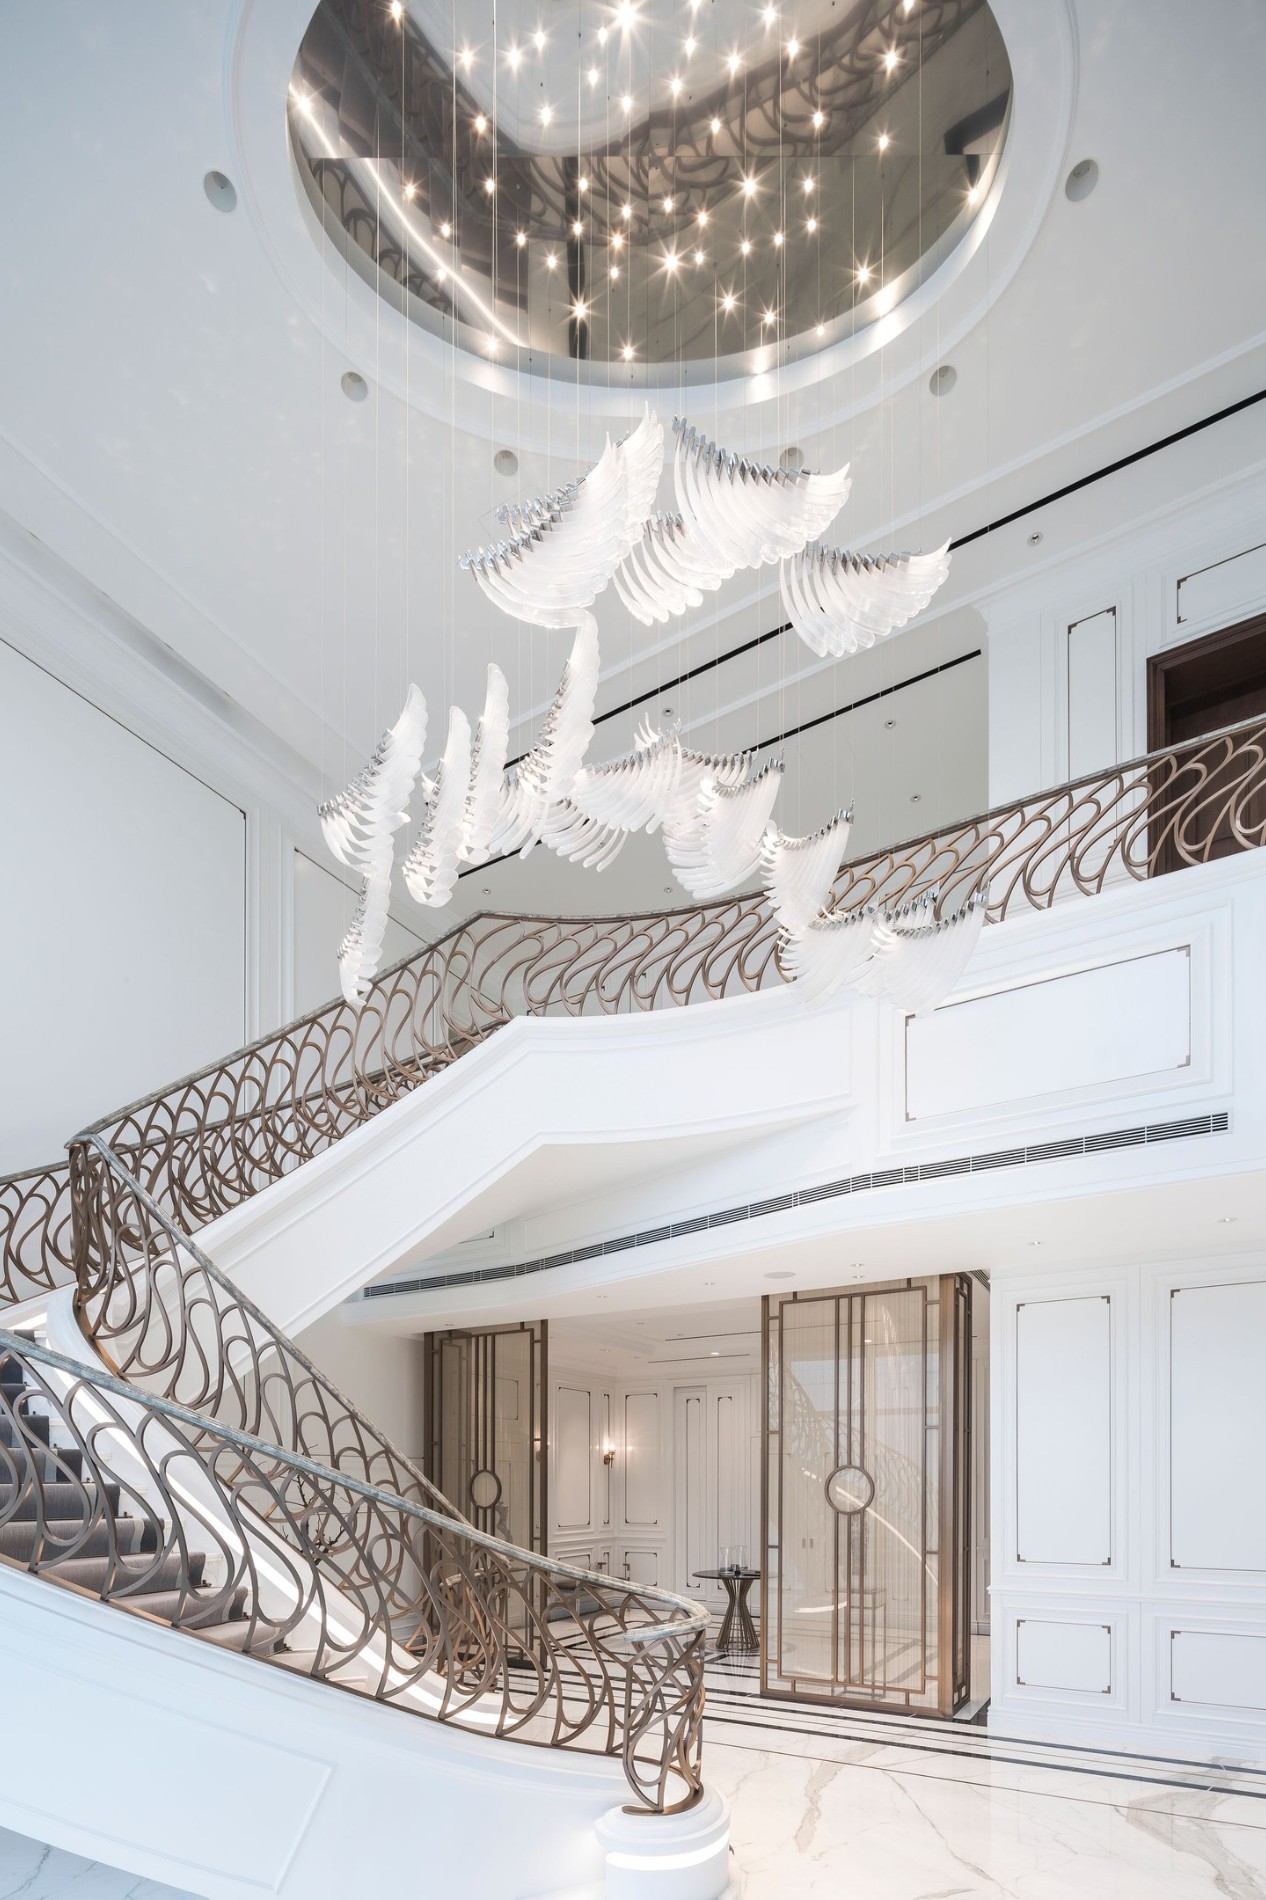 Art glass wings Long Staircases Chandeliers indoor decorative for hotel